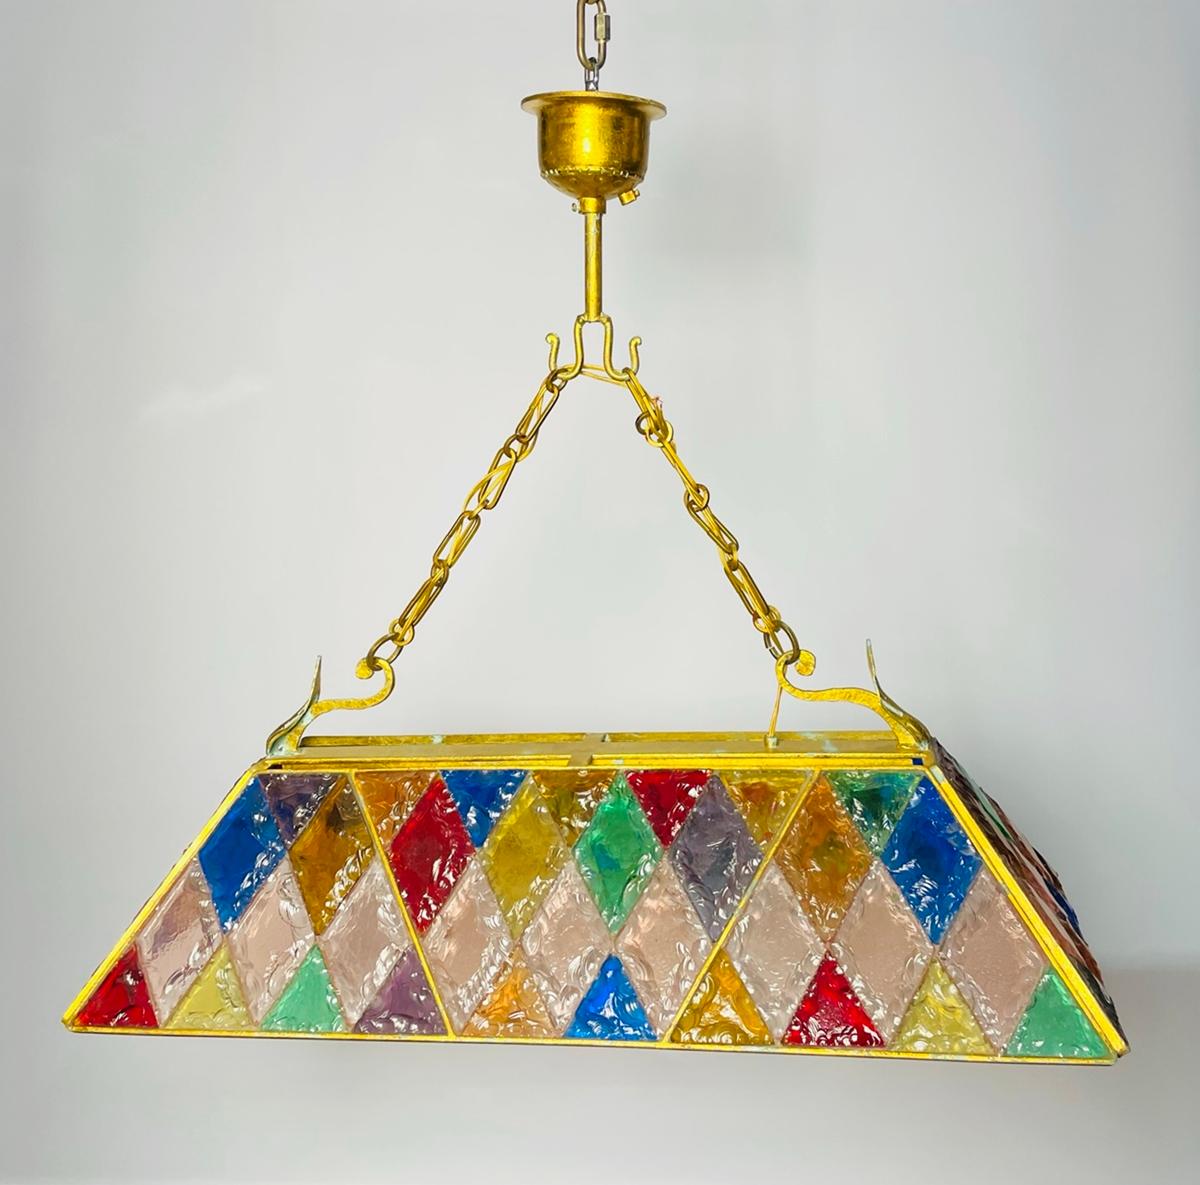 Introducing the Wrought Iron & Hammered Glass Chandelier by Longobard, a stunning piece of Italian craftsmanship from the 1970s. This exquisite chandelier is a true work of art, featuring a colorful stained glass design that will add a touch of